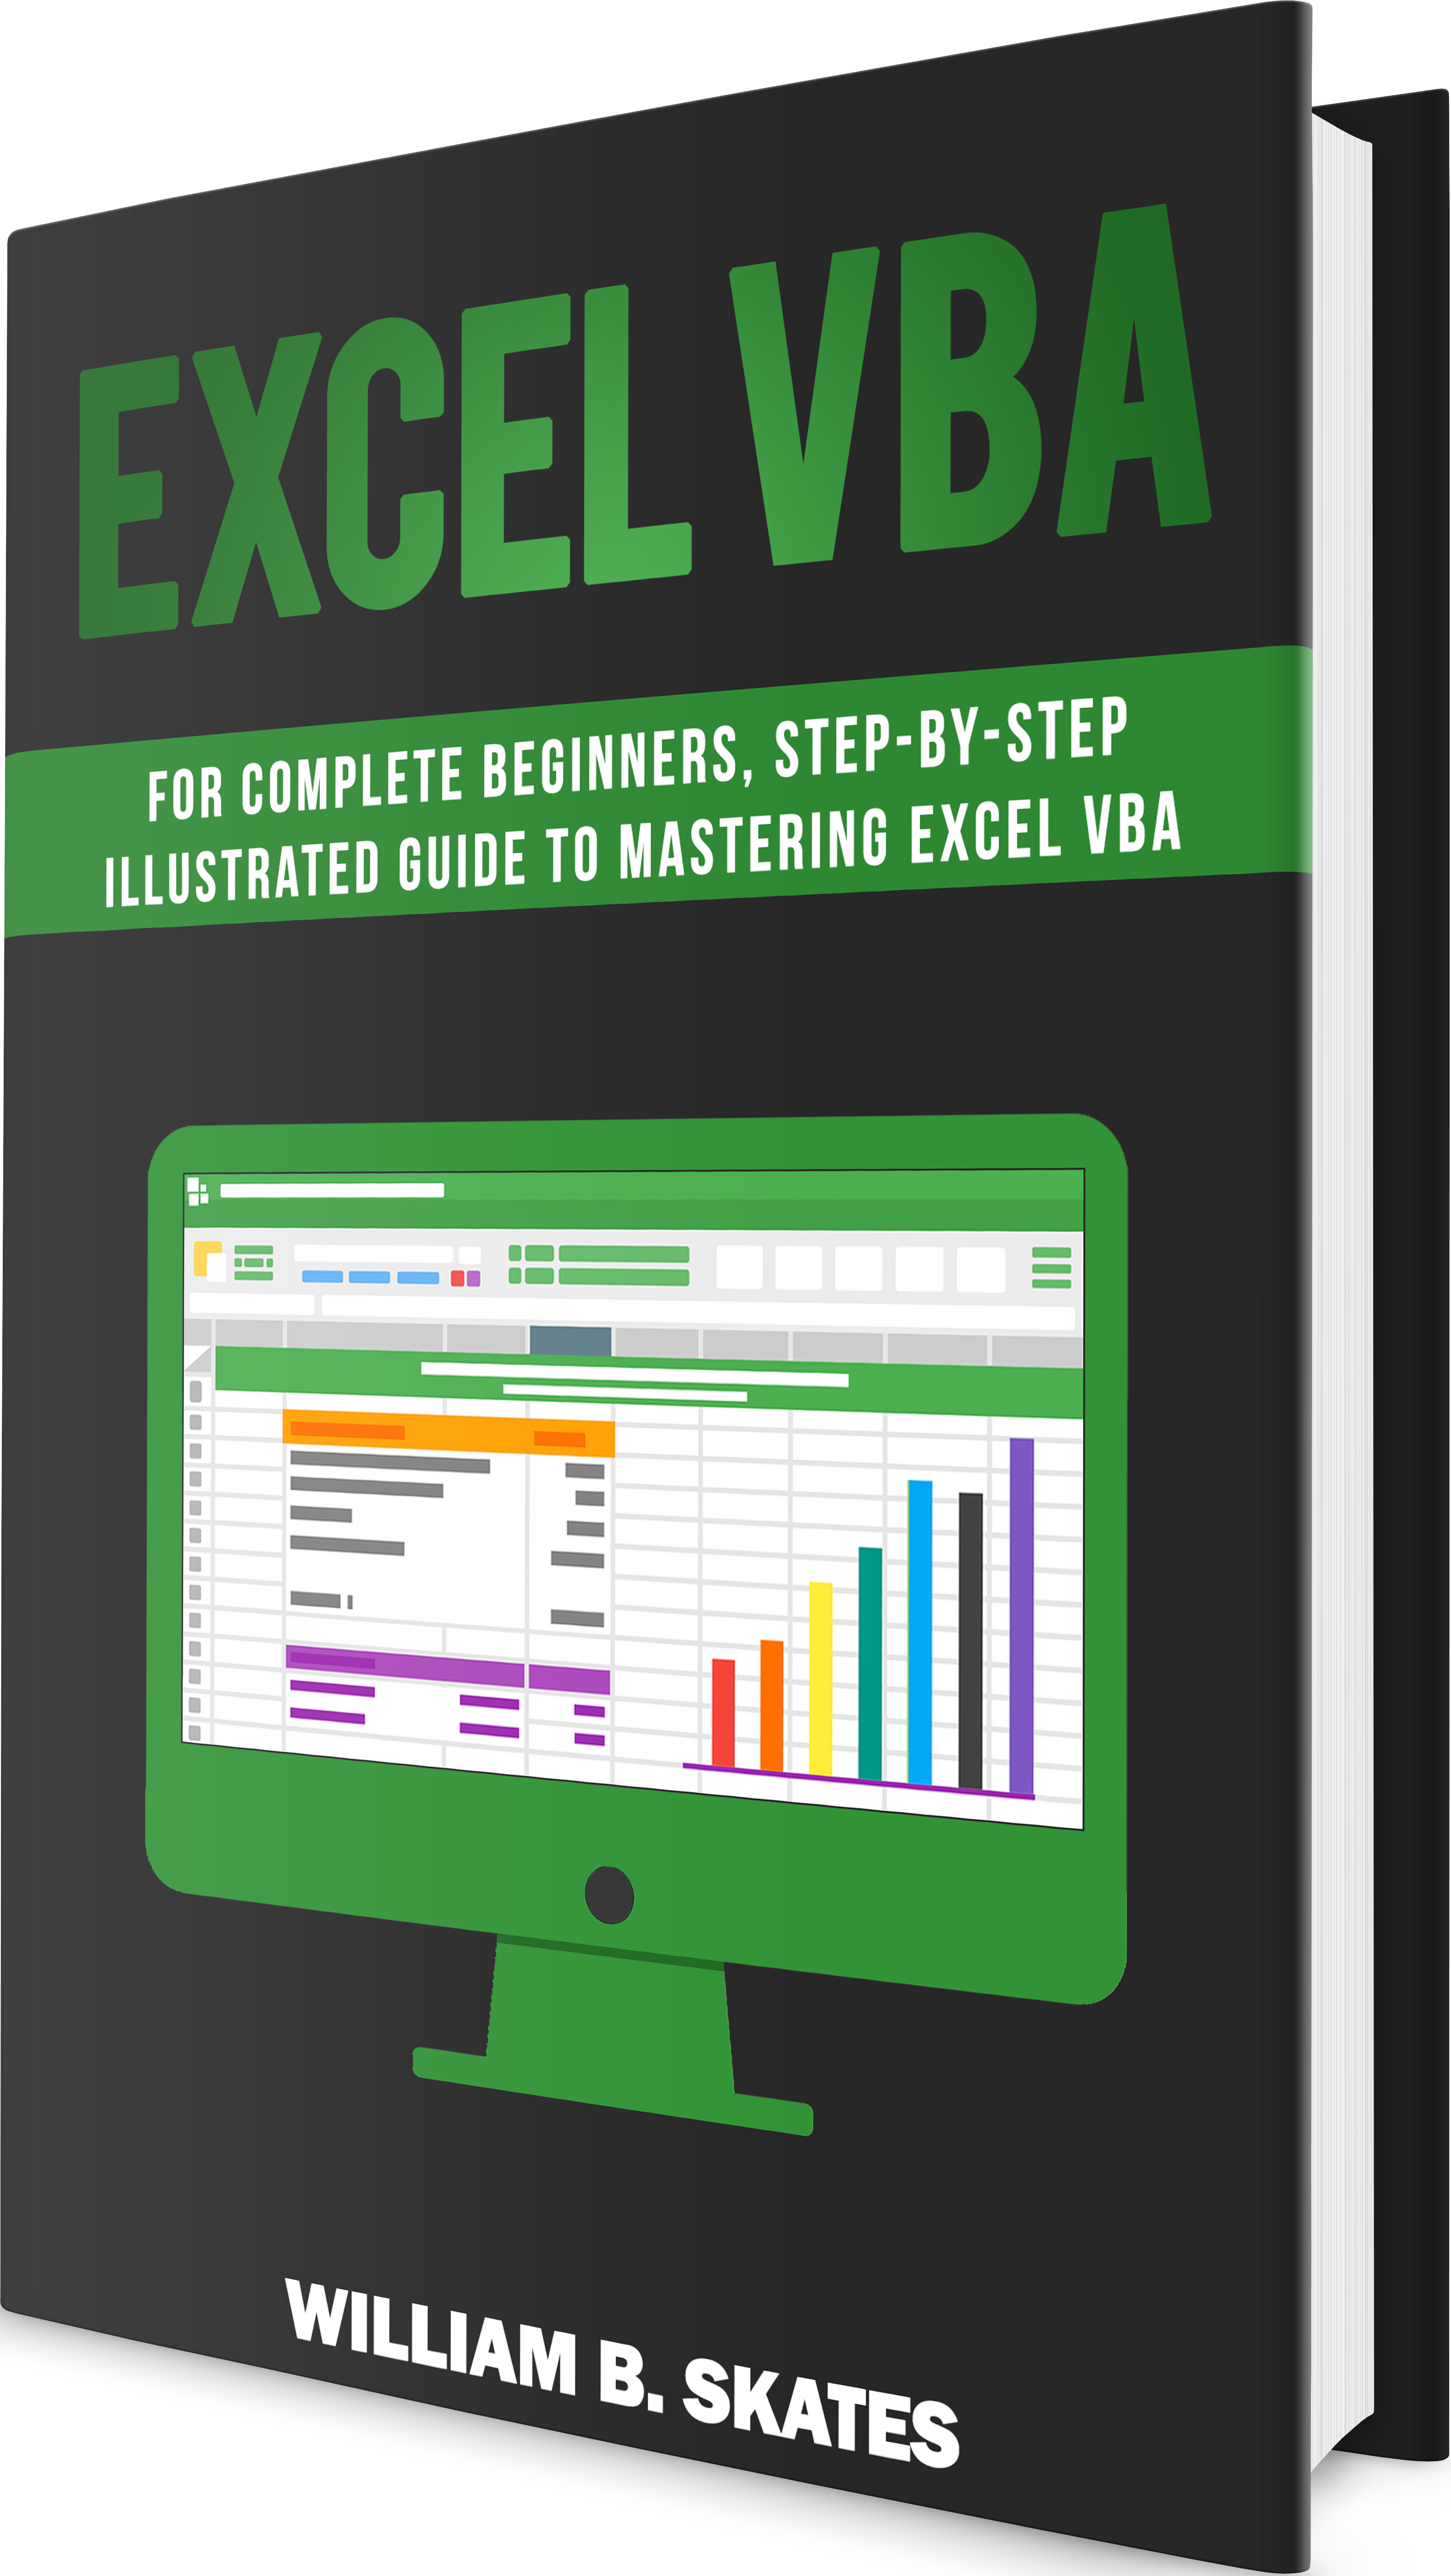 FREE: Excel VBA: Programming For Complete Beginners, Step-By-Step Illustrated Guide to Mastering Excel VBA by William B. Skates